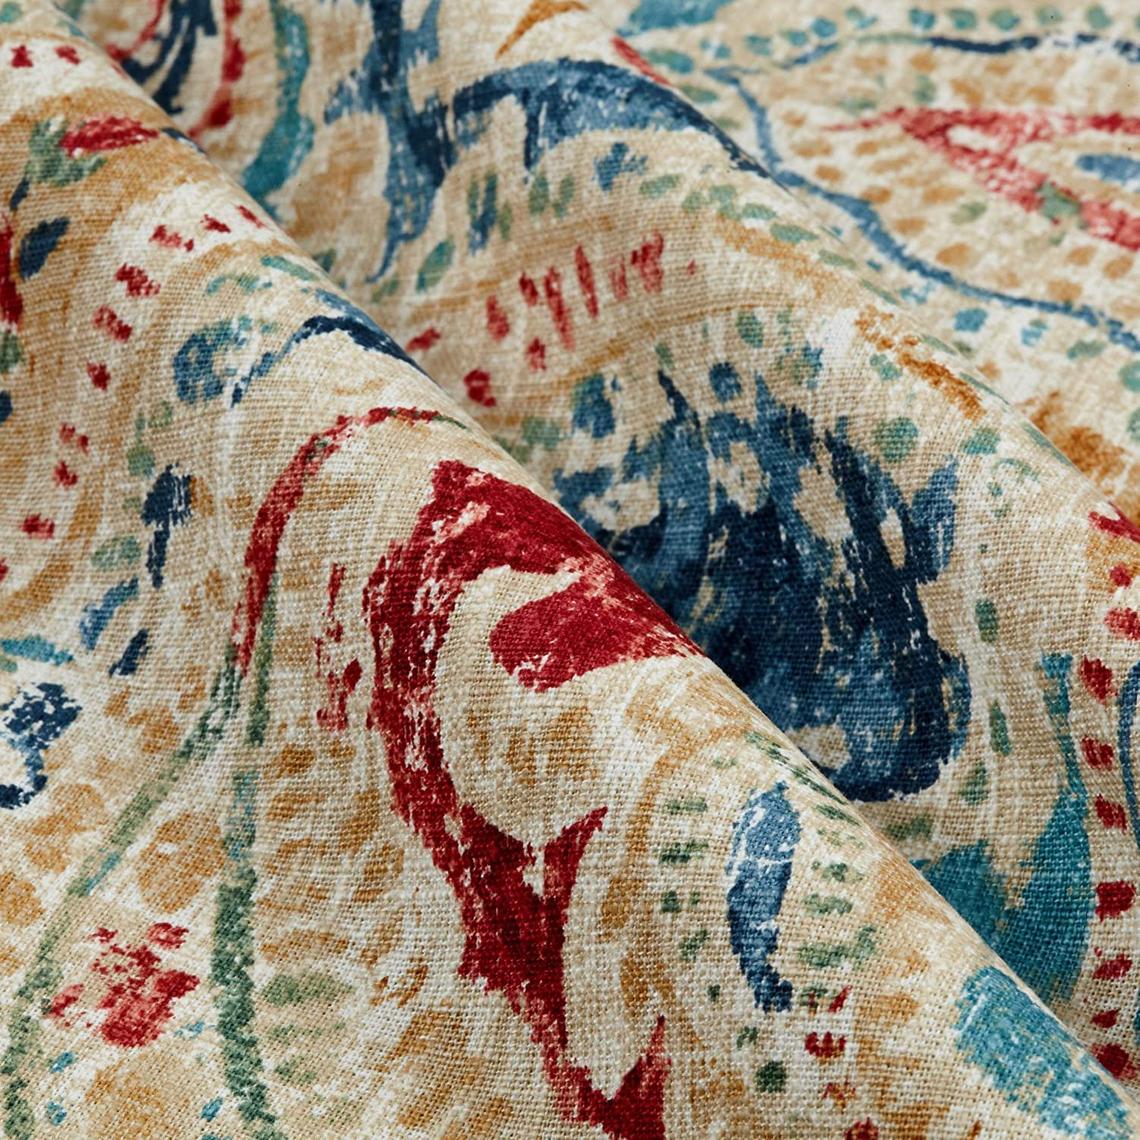 gathered bedskirt in pisces multi weathered paisley large scale